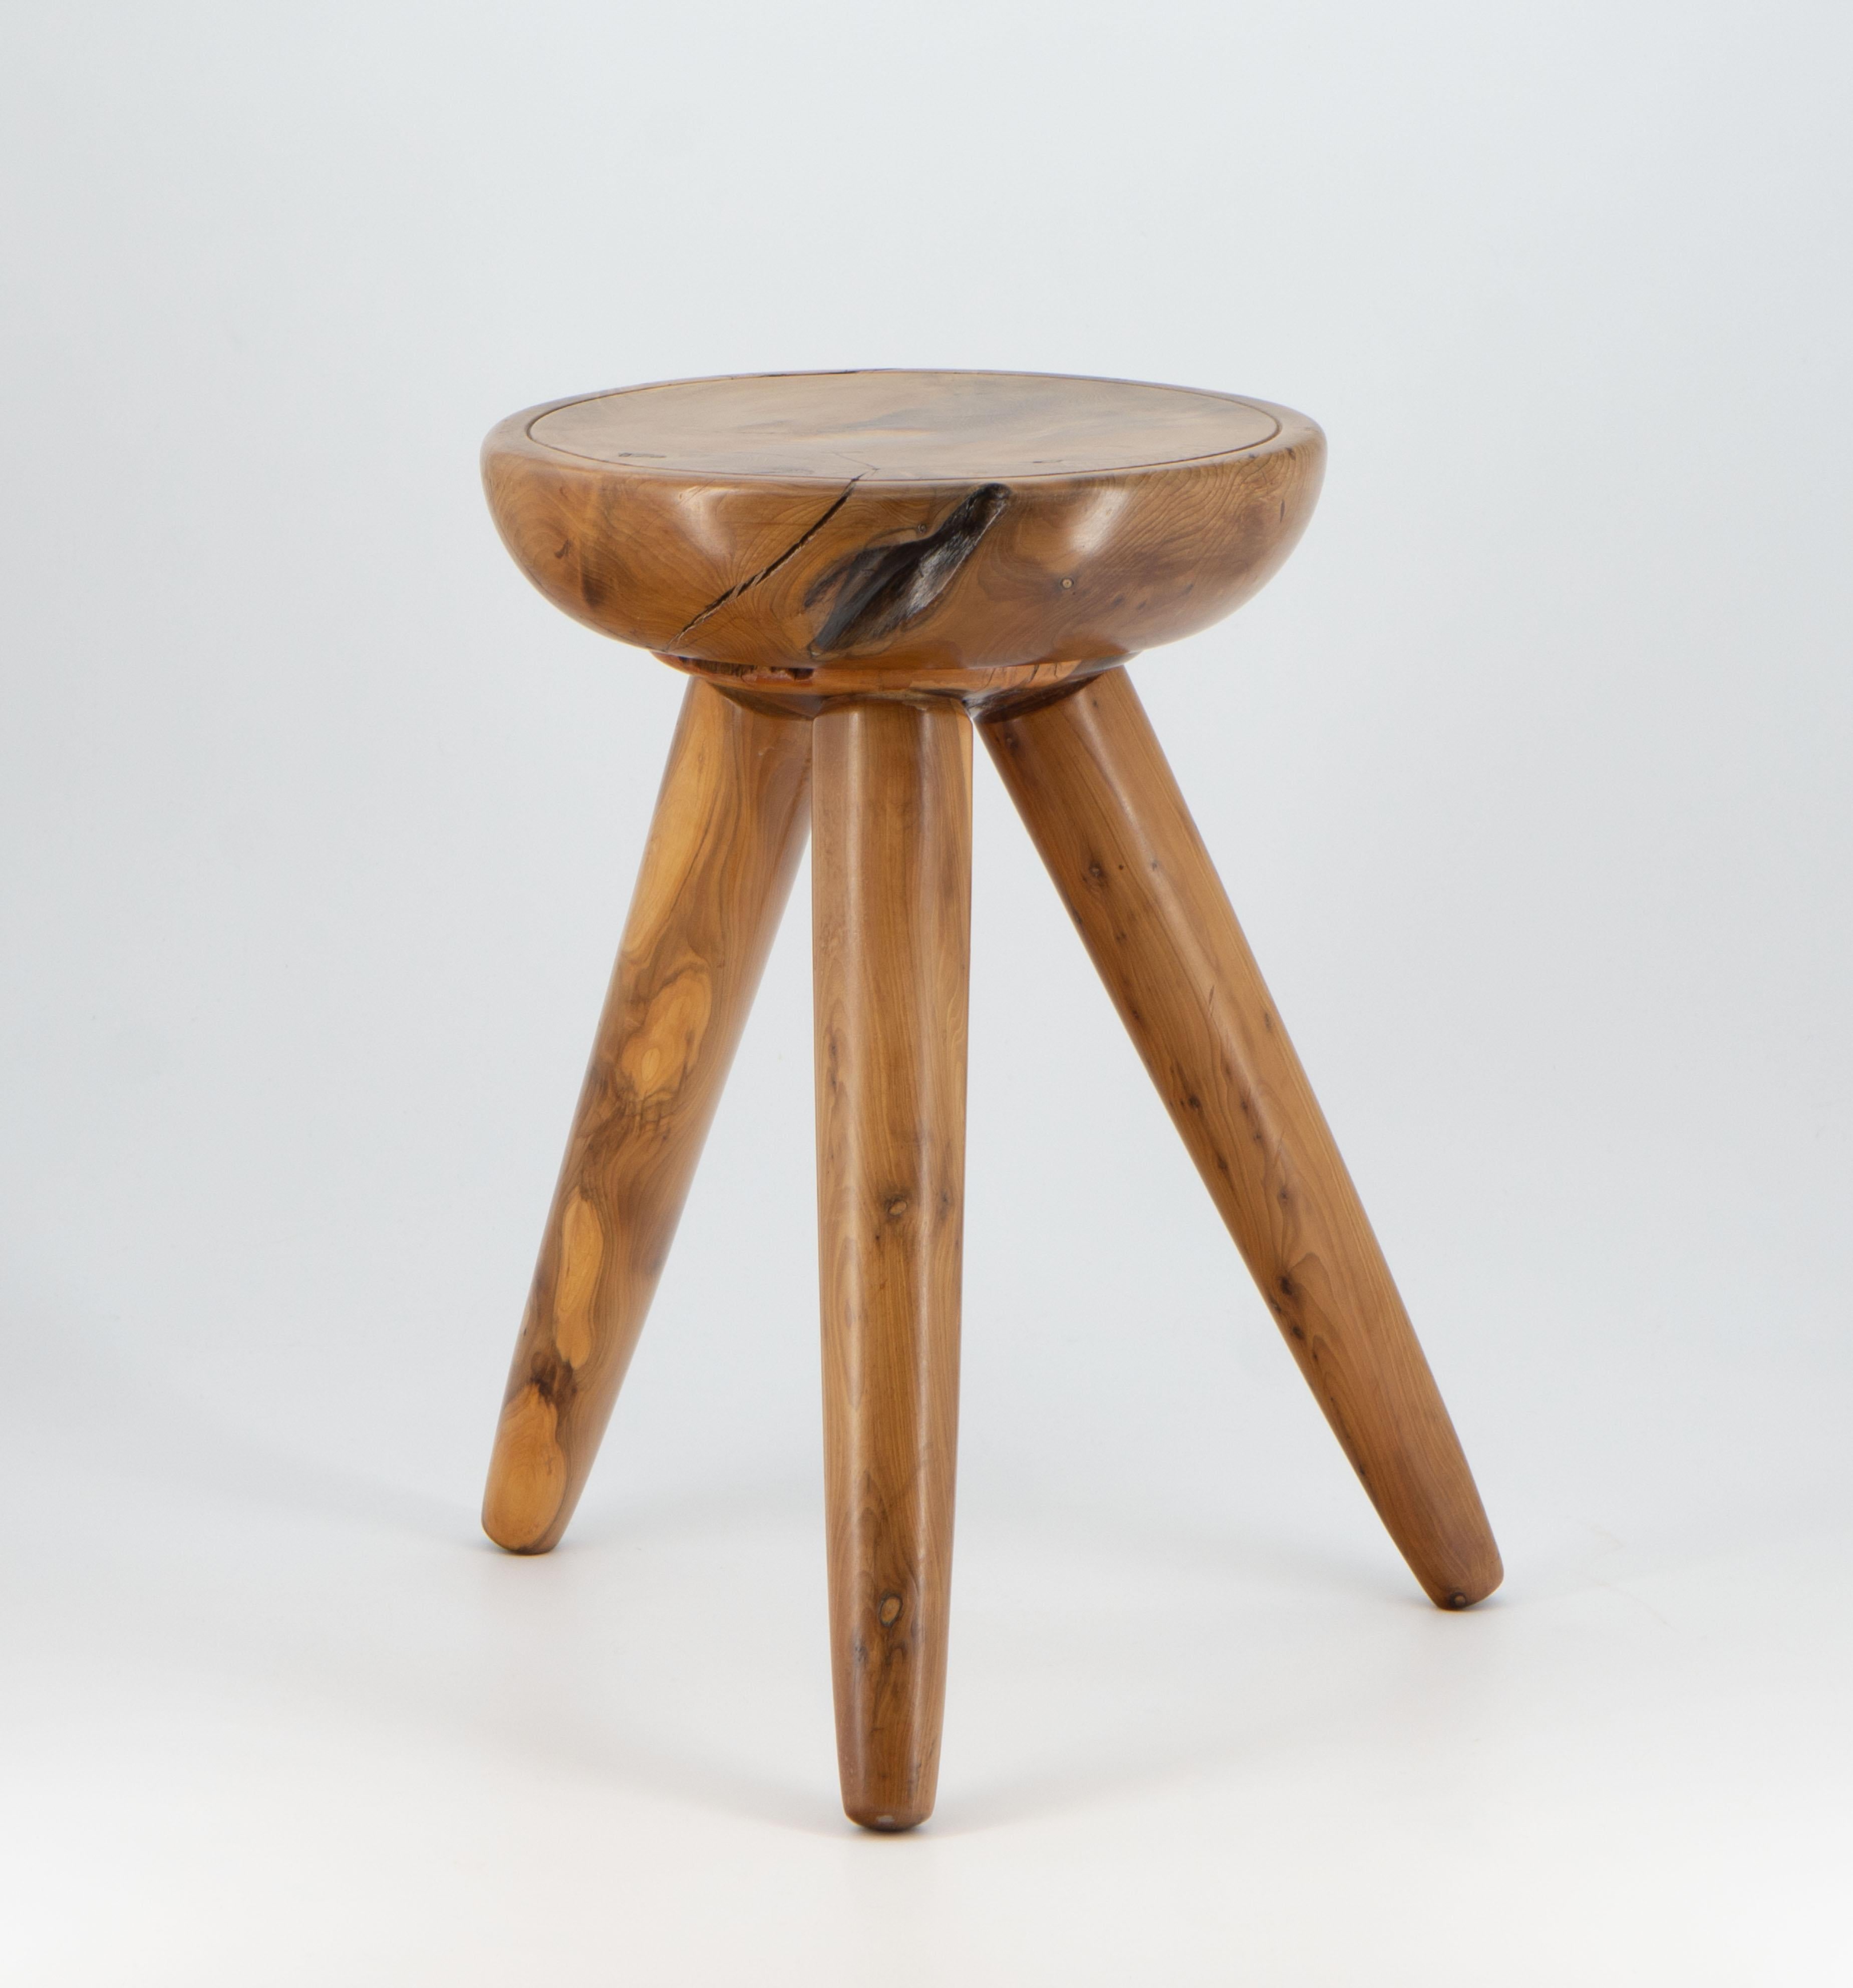 Midcentury Yew Low Table Stool Perriand Manner  In Good Condition For Sale In Norwich, GB